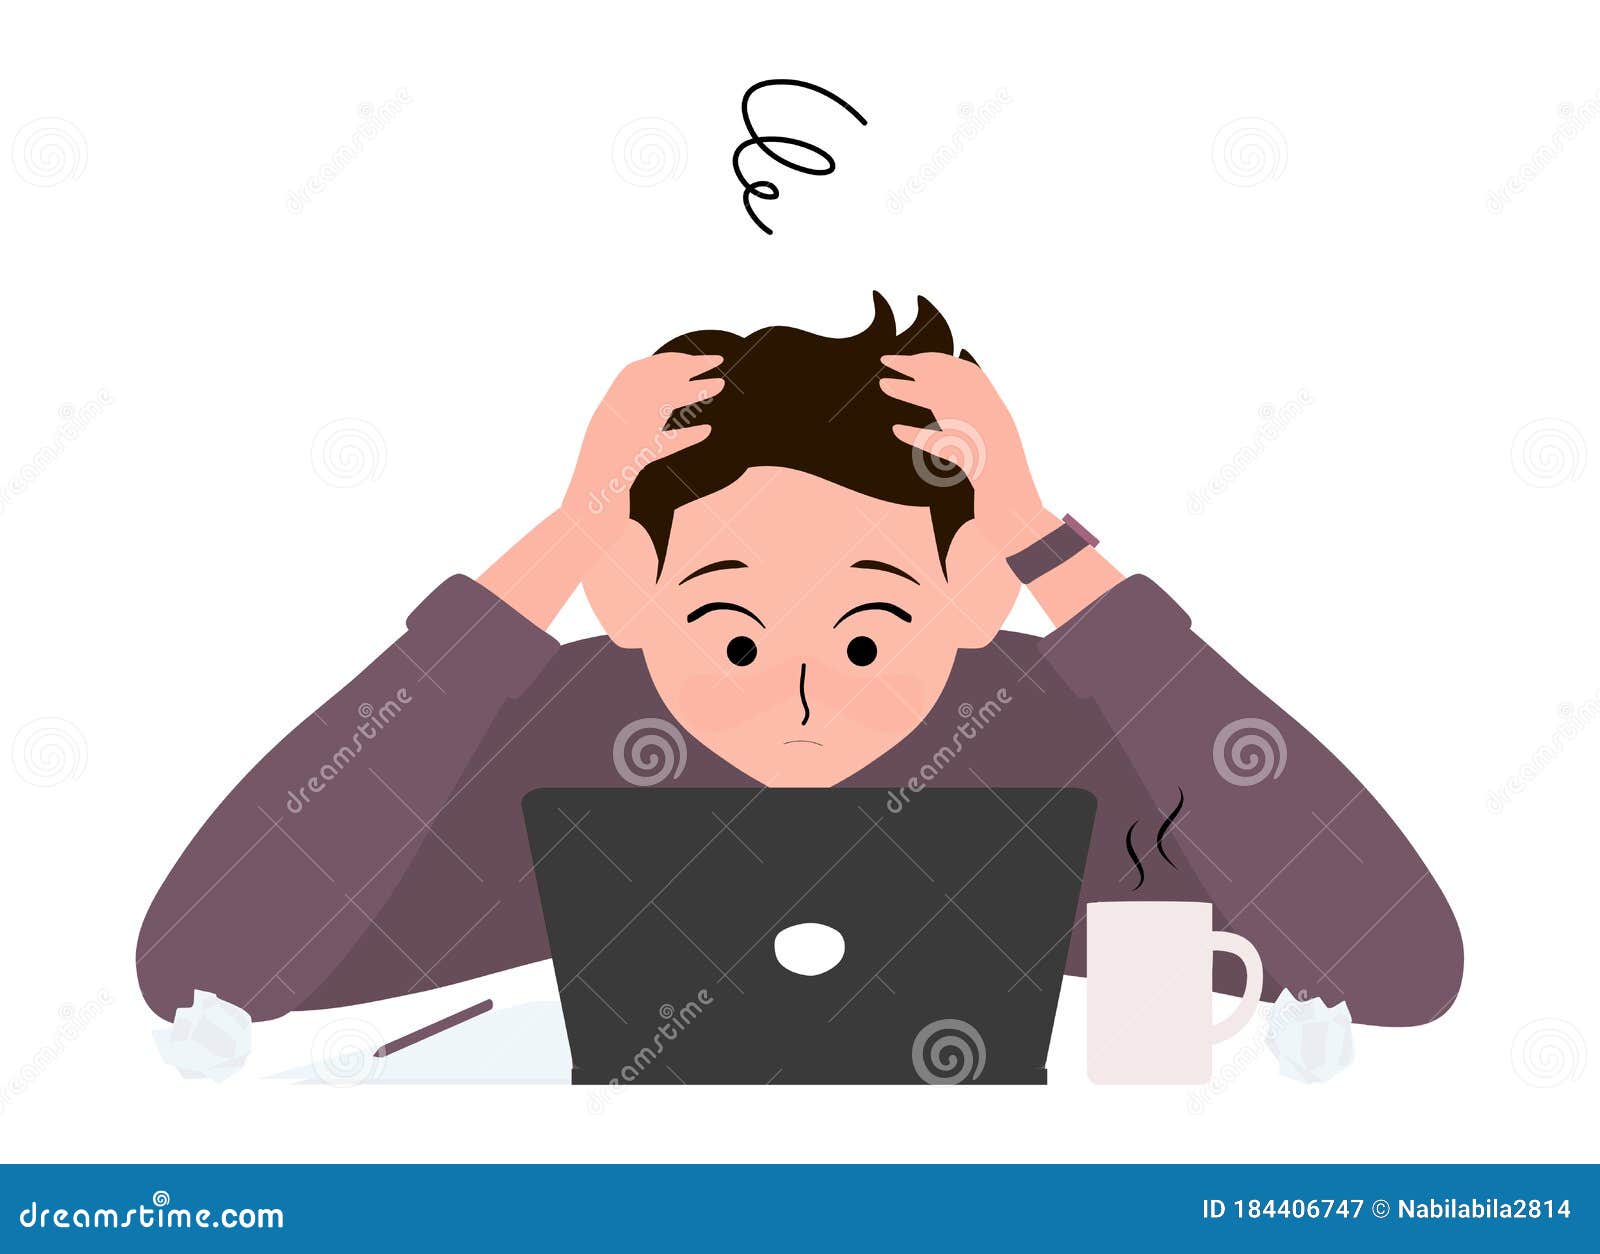 Stress Concept. Stressful Businessman Working in Office Tired and Bored  Illustration Flat Vector Cartoon Character Stock Vector - Illustration of  desk, corporate: 184406747